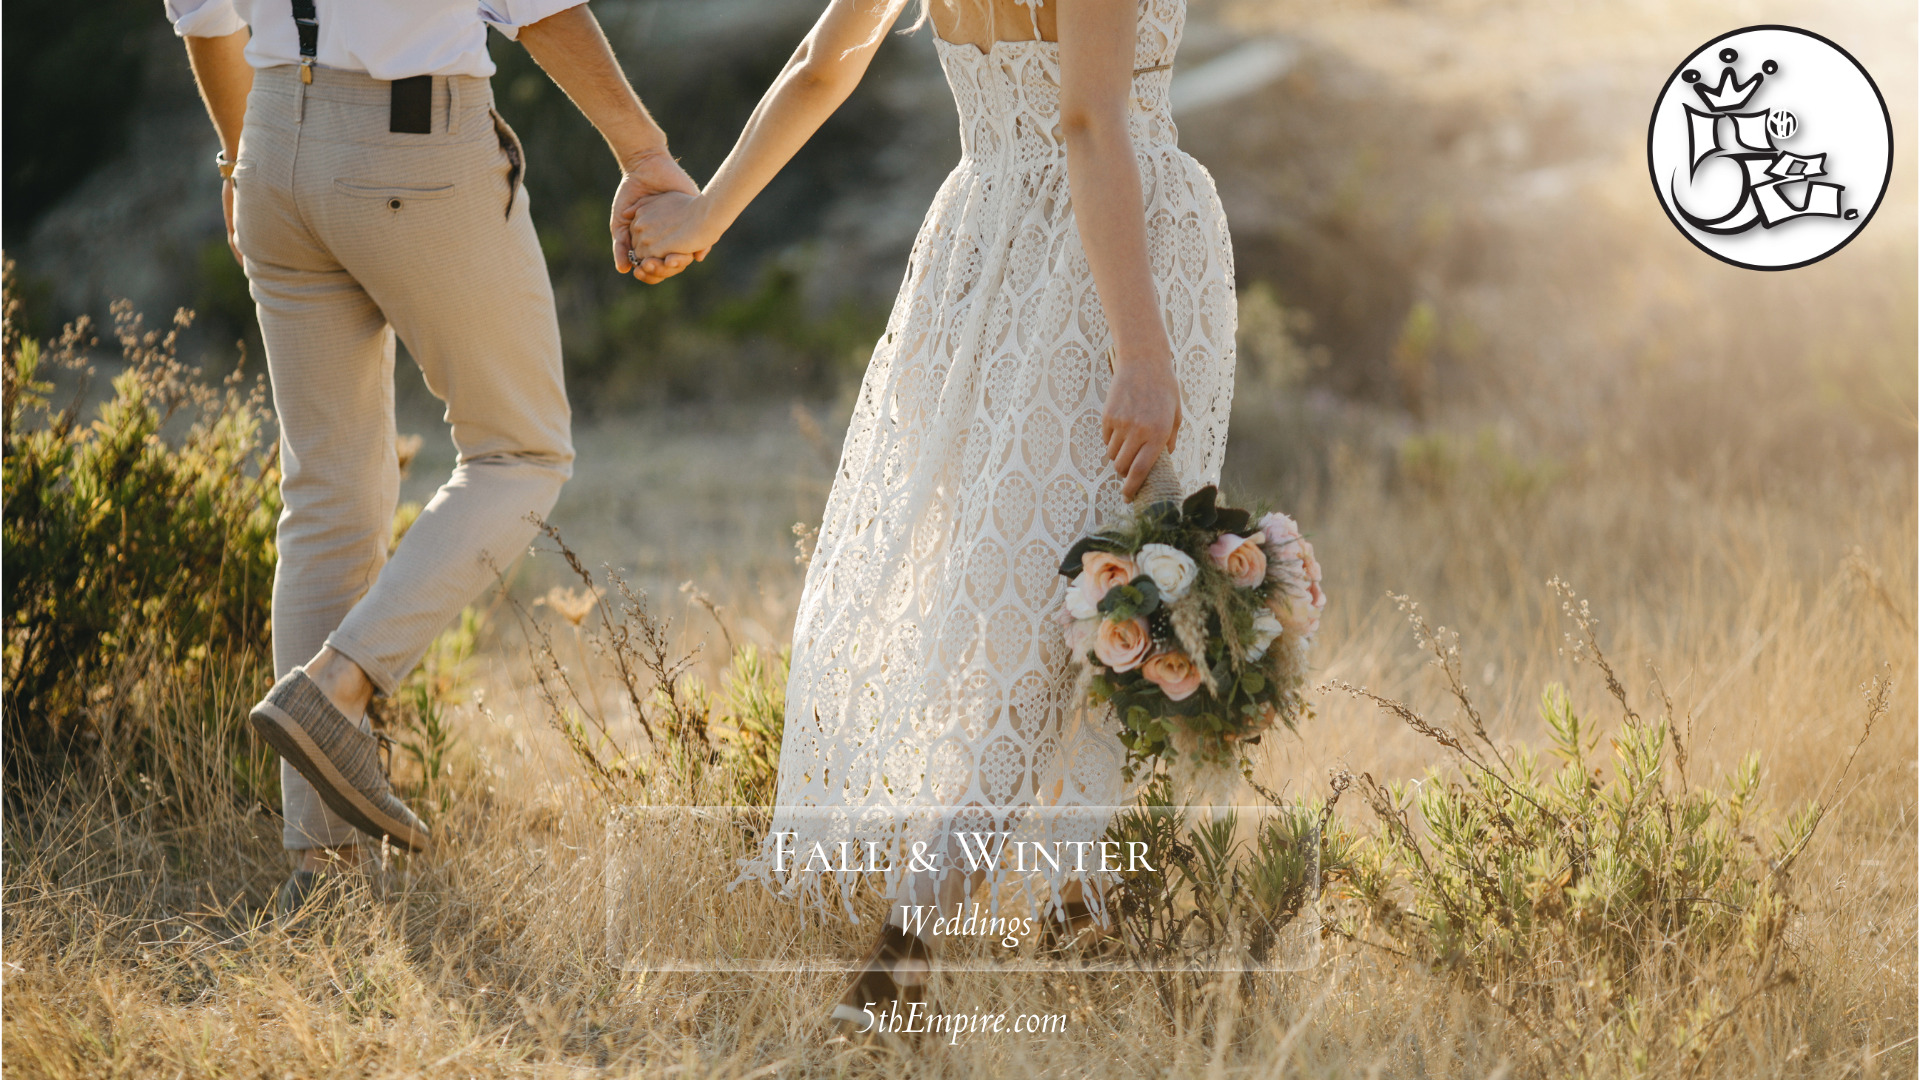 Couple walking hand in hand during the fall. Bride has a bouquet in hand.